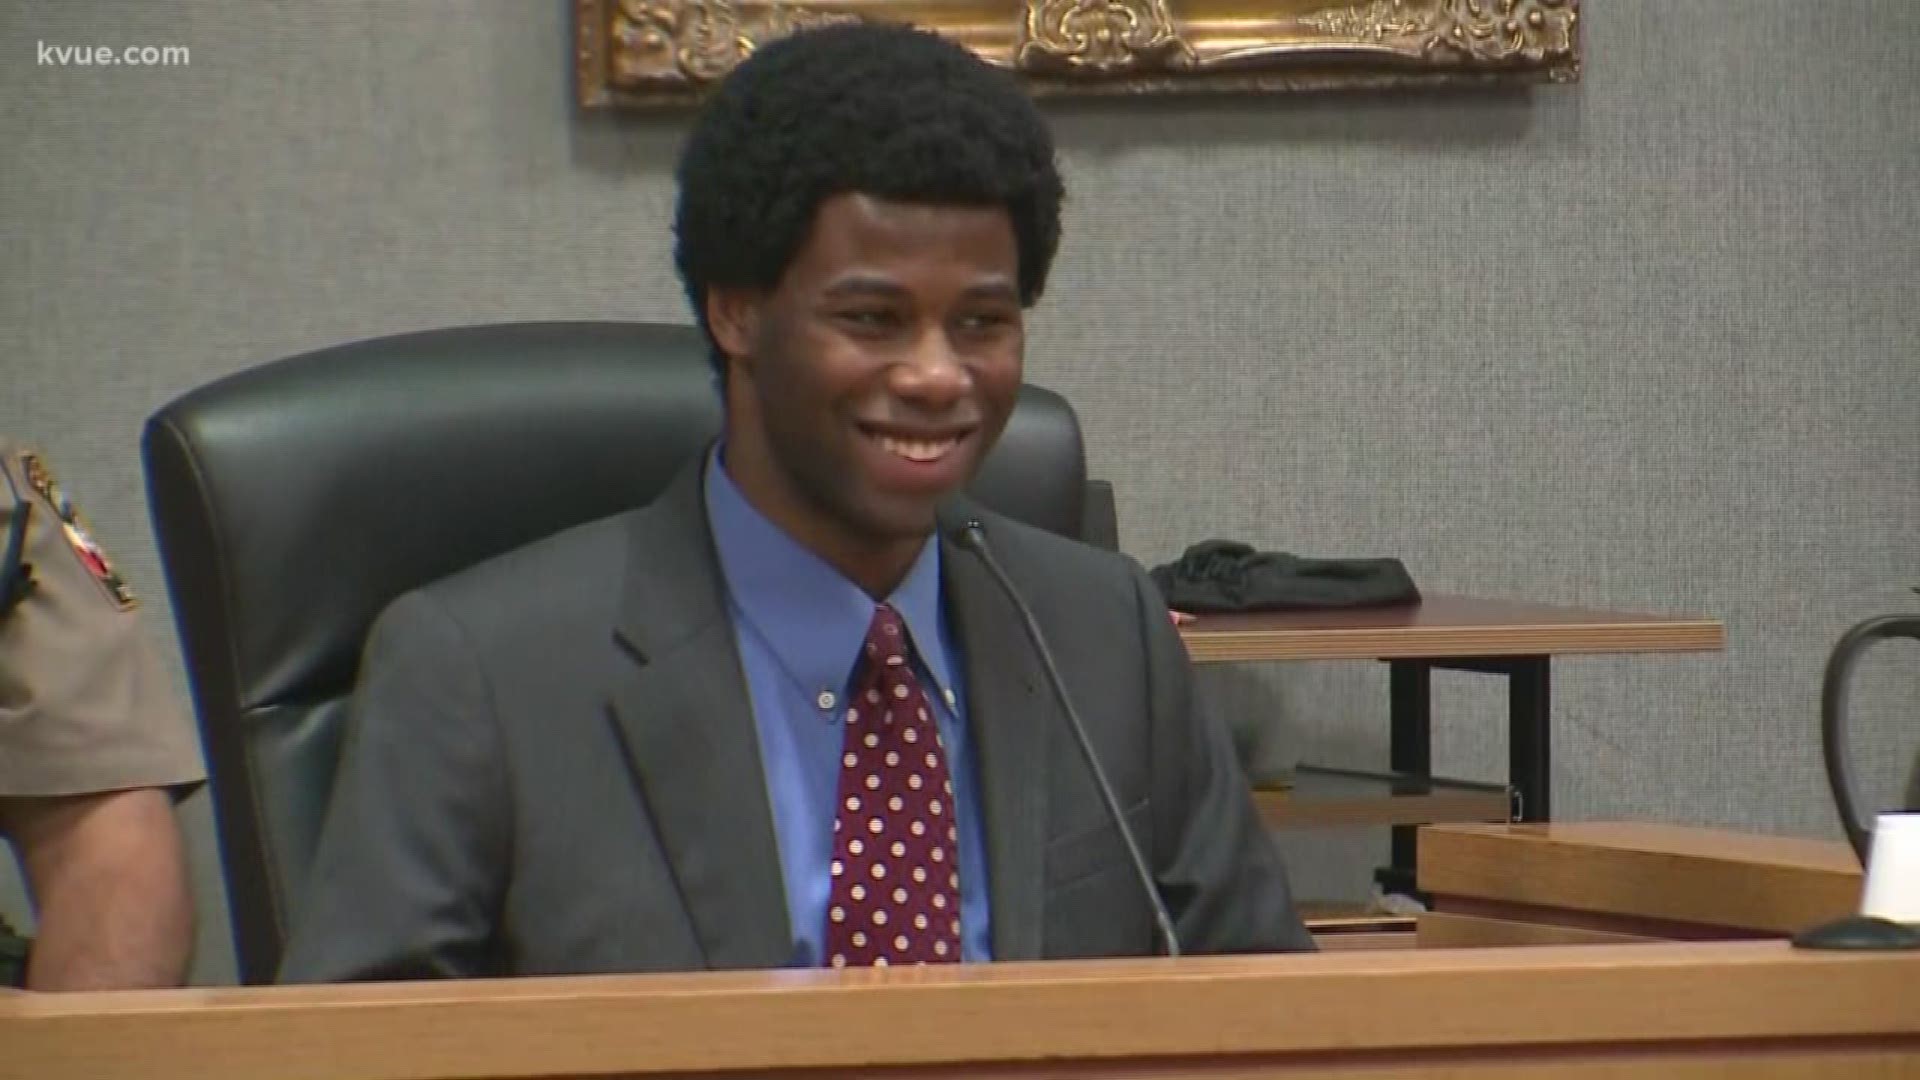 Some confused reactions coming from the courtroom today after a man charged with capital murder in the death of a UT student was laughing on the stand.